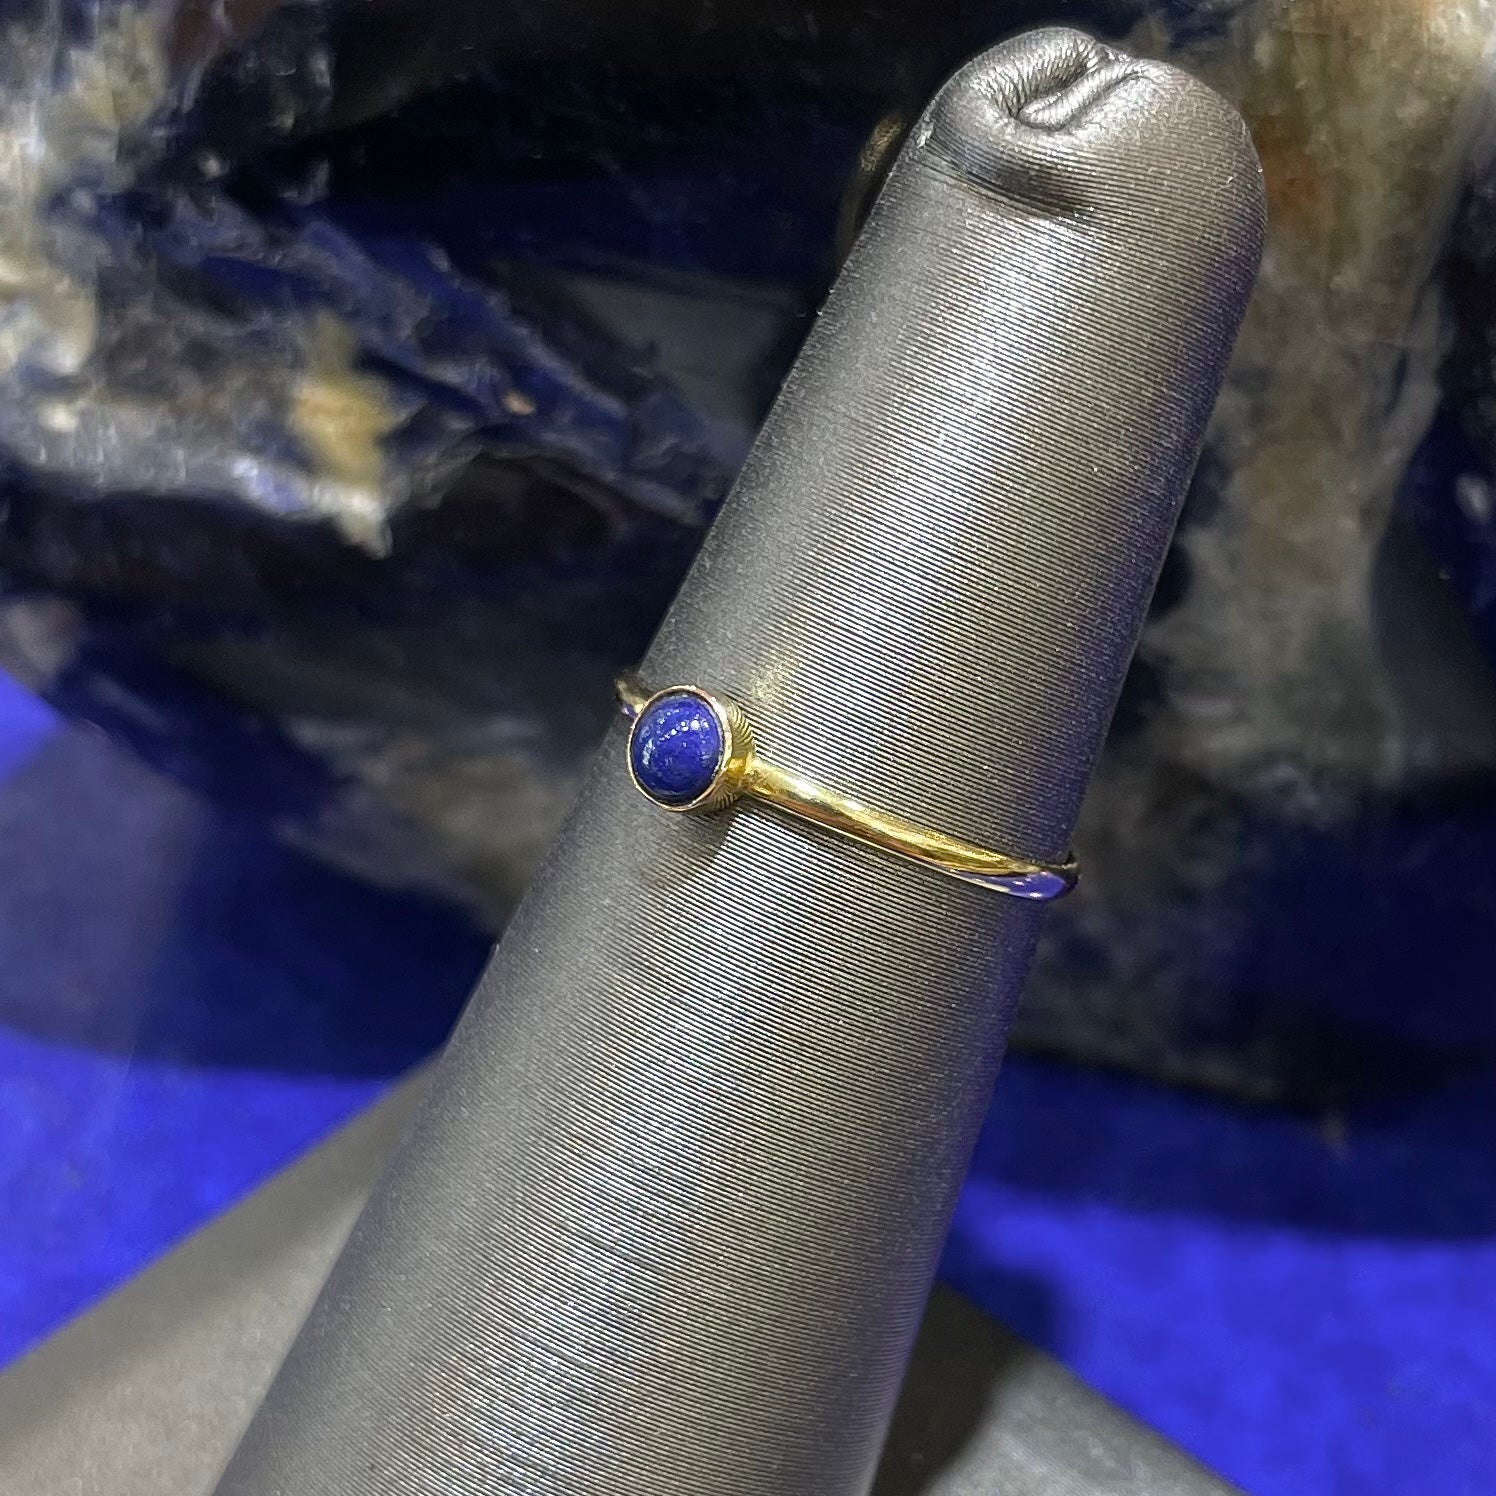 Round cabochon cut blue lapis lazuli stone set in a dainty simple yellow gold solitaire ring.